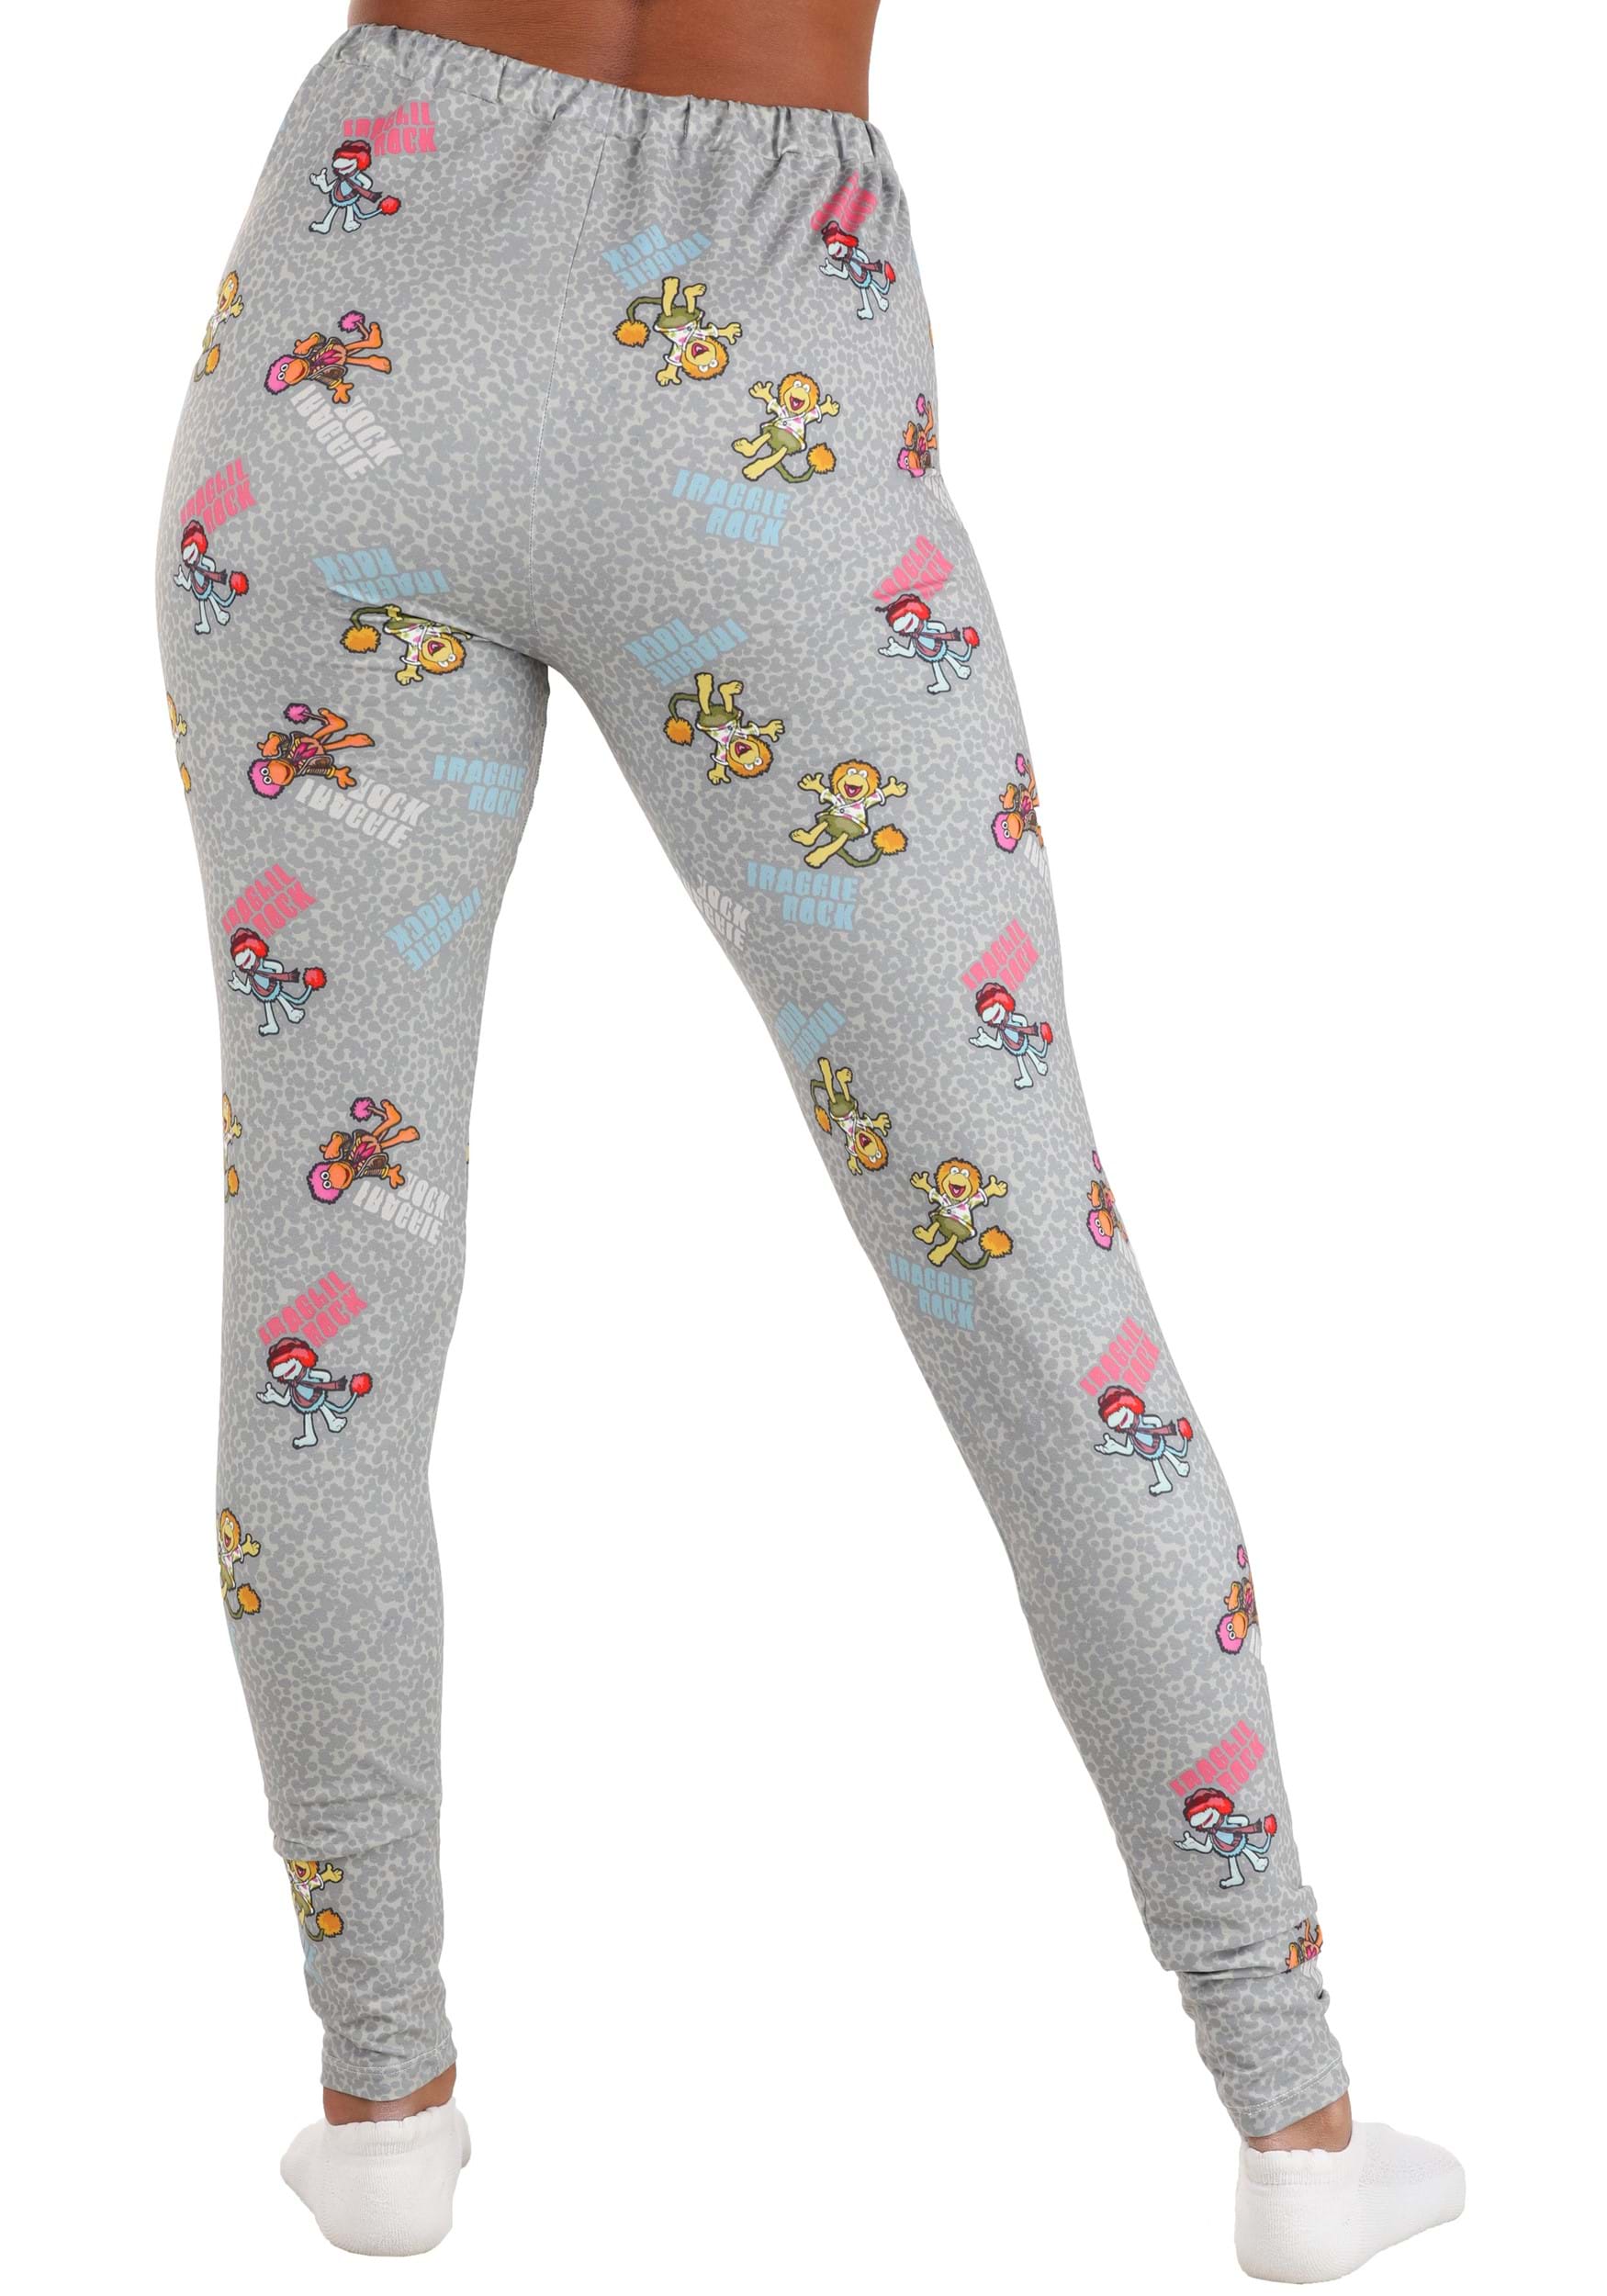 Fraggle Rock Leggings For Adults